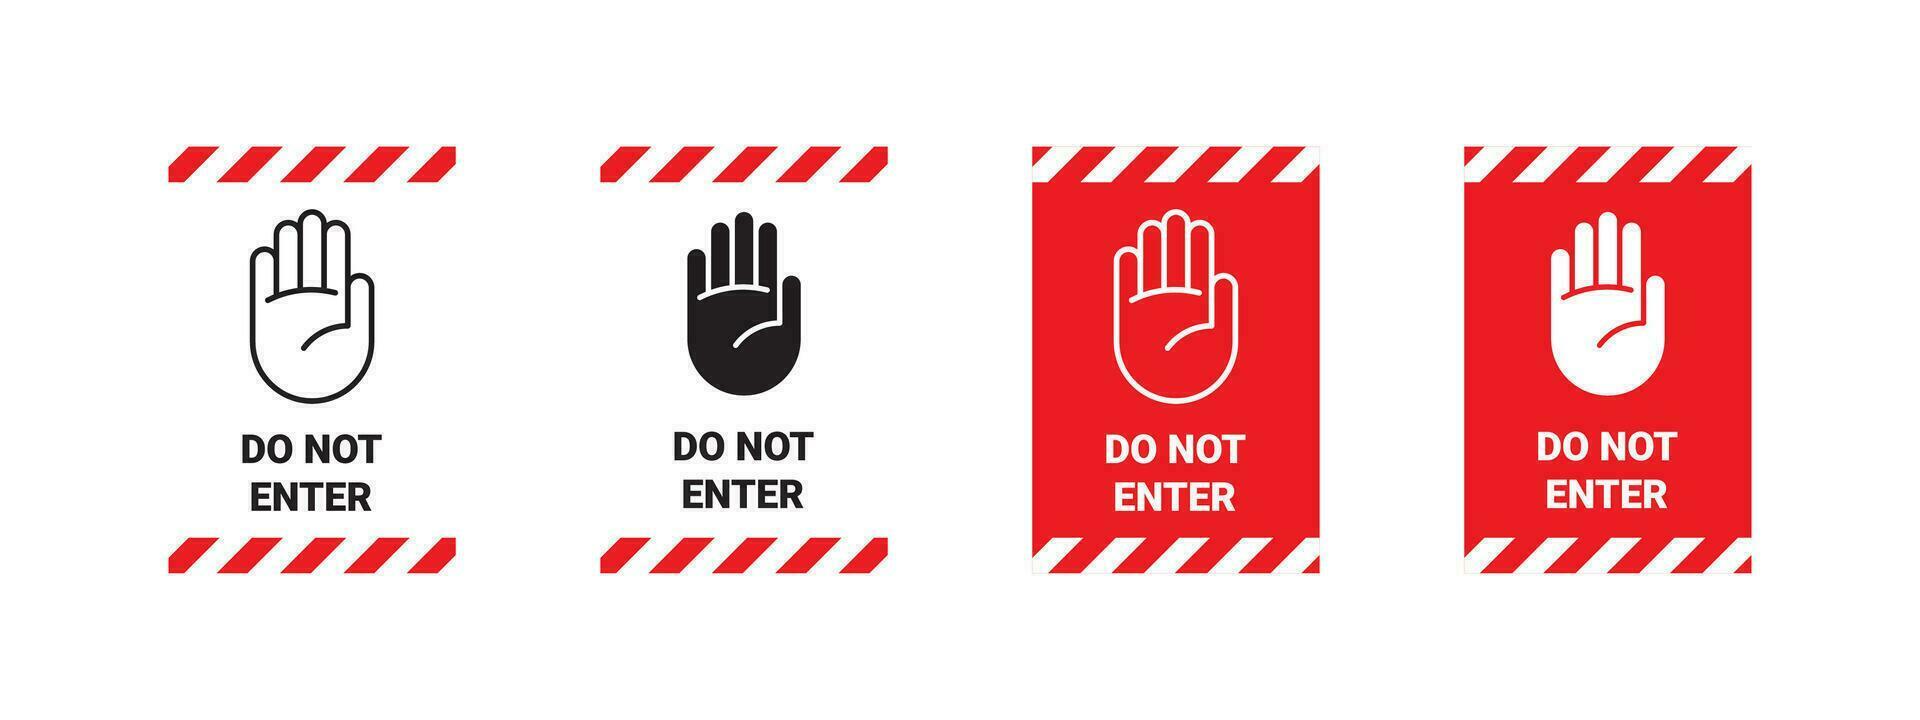 Do not enter. Prohibition signs. Notice do not enter. Vector scalable graphics